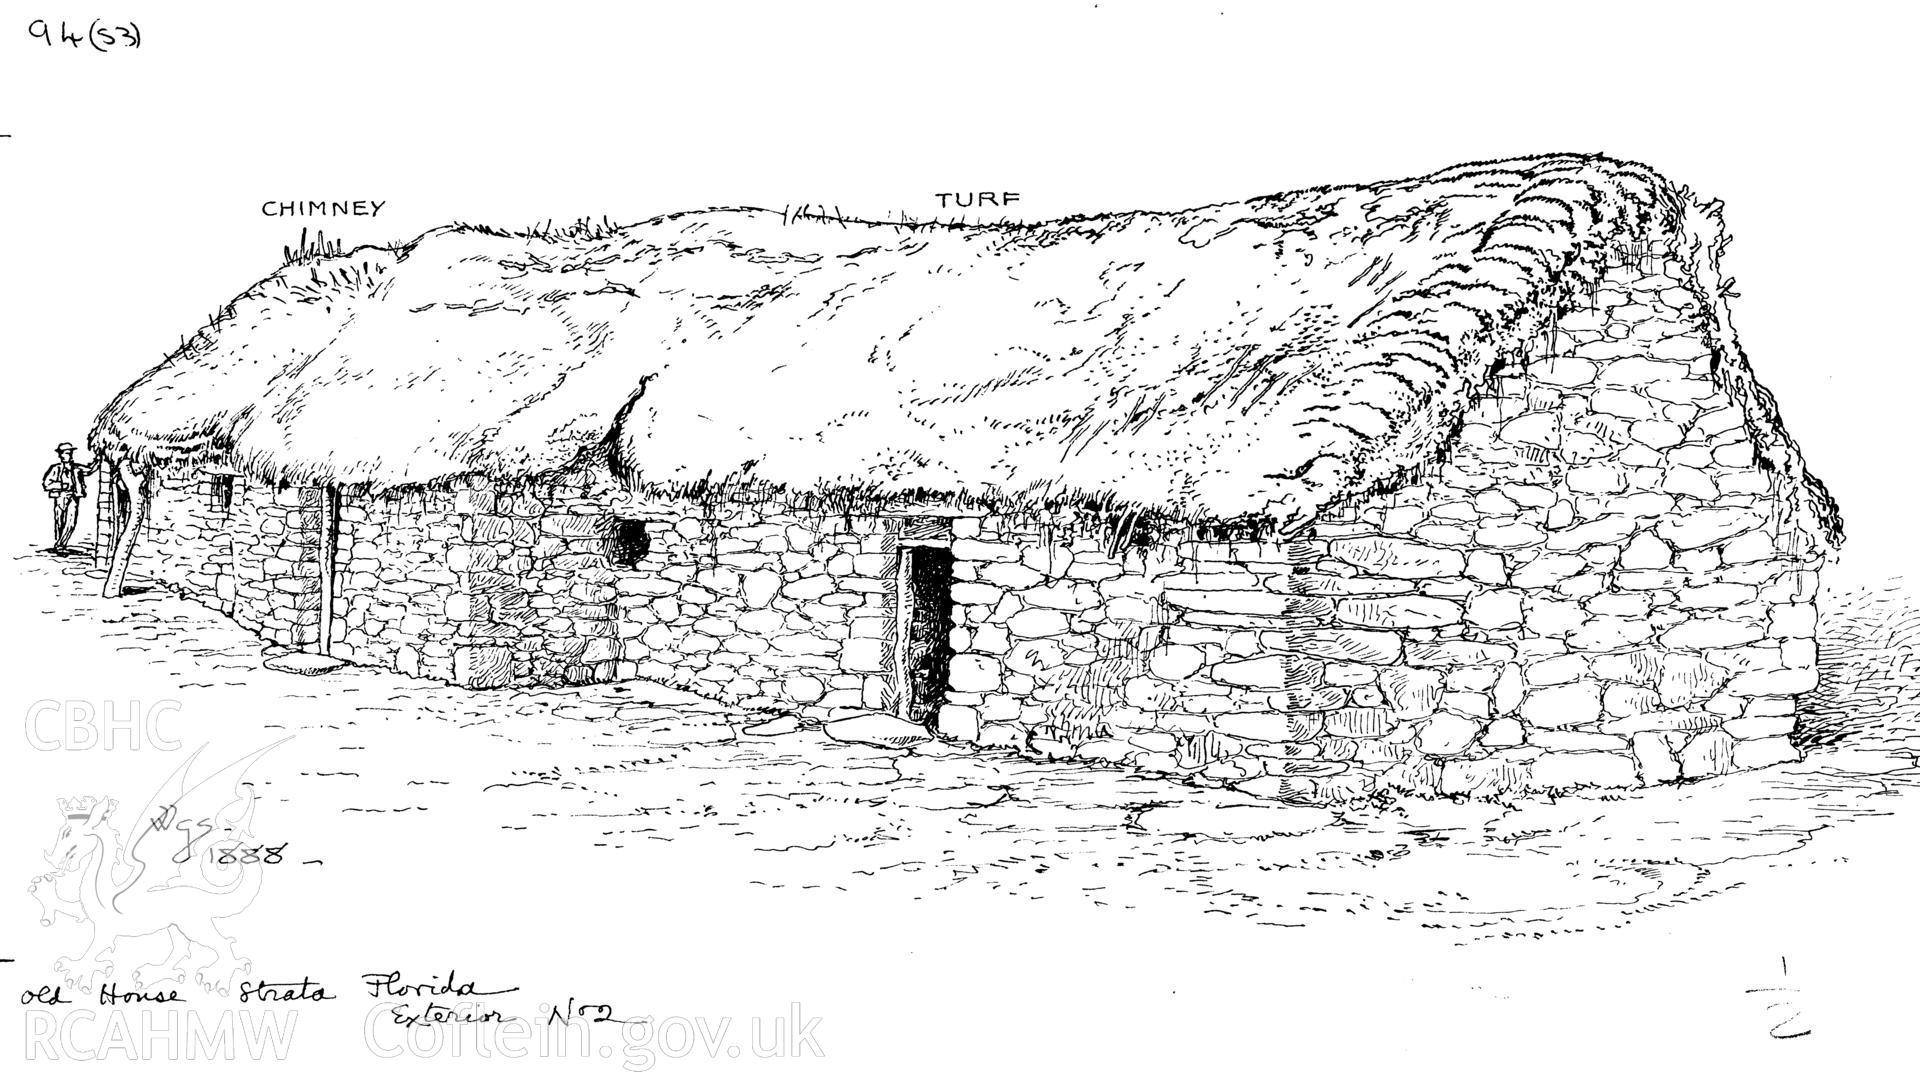 Non RCAHMW drawing (ink on paper) showing sketch of Old House, Strata Florida.